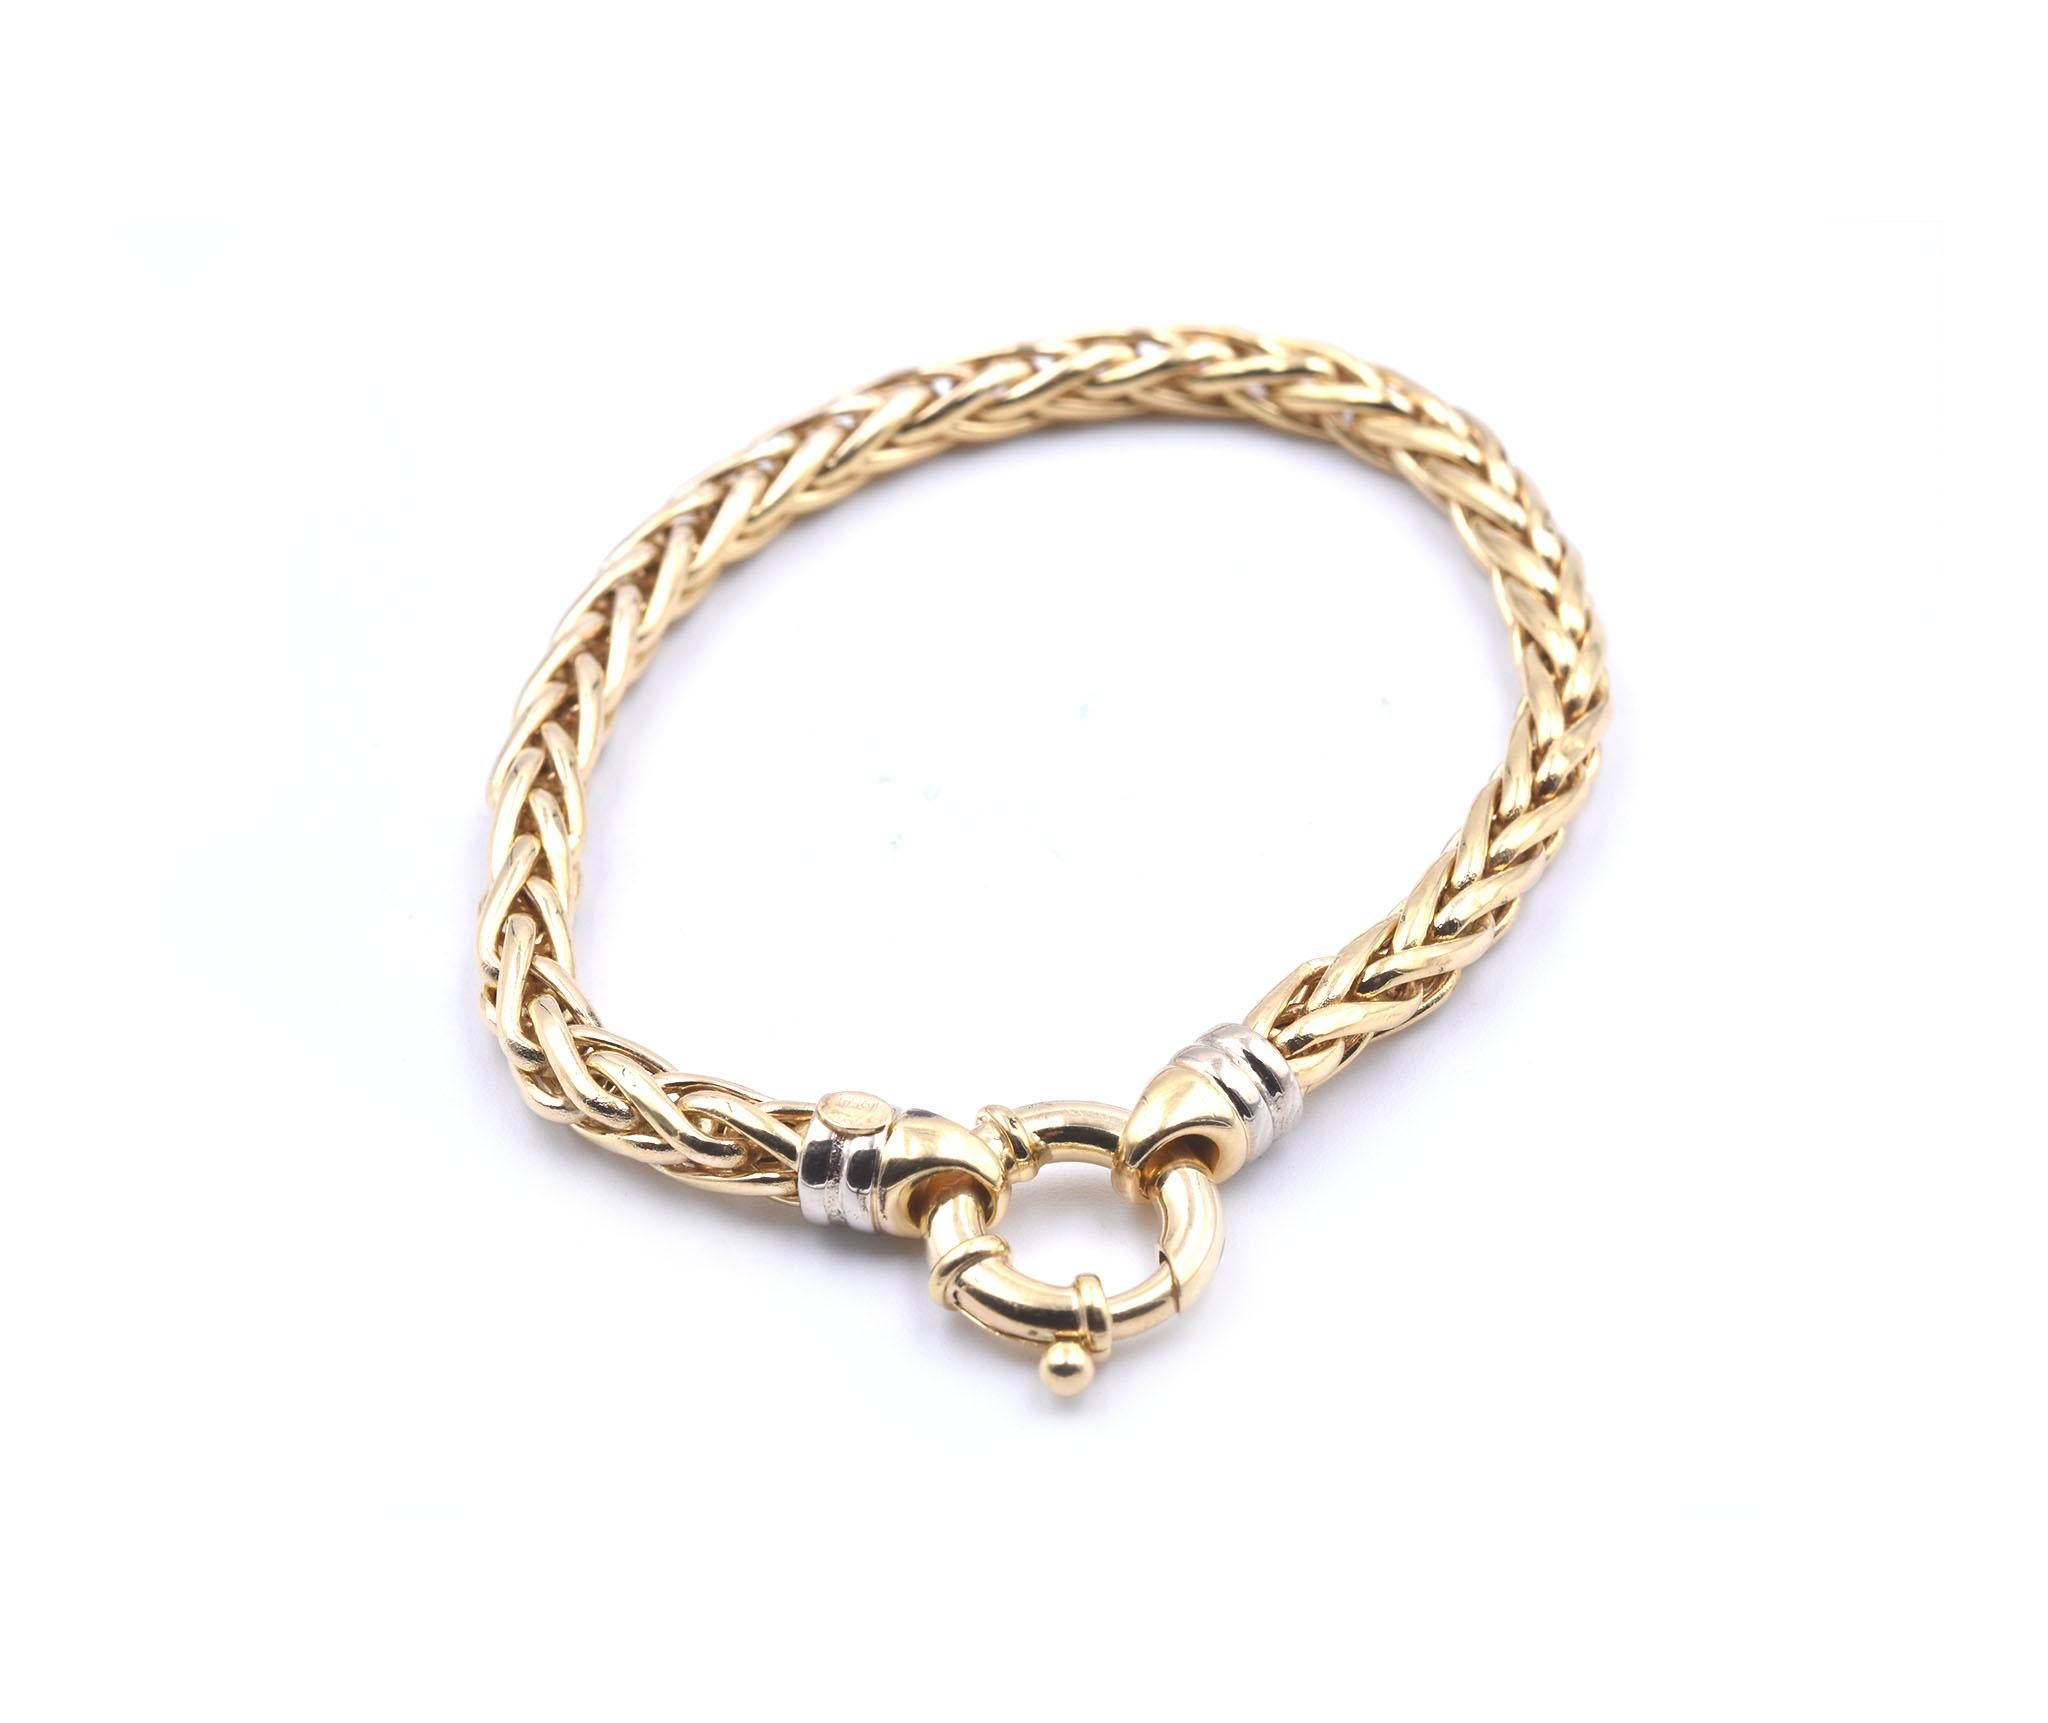 Designer: custom design
Material: 18k yellow gold
Dimensions: bracelet will fit a 7 ½-inch wrist, bracelet is 5.14mm wide
Weight: 12.69 grams
